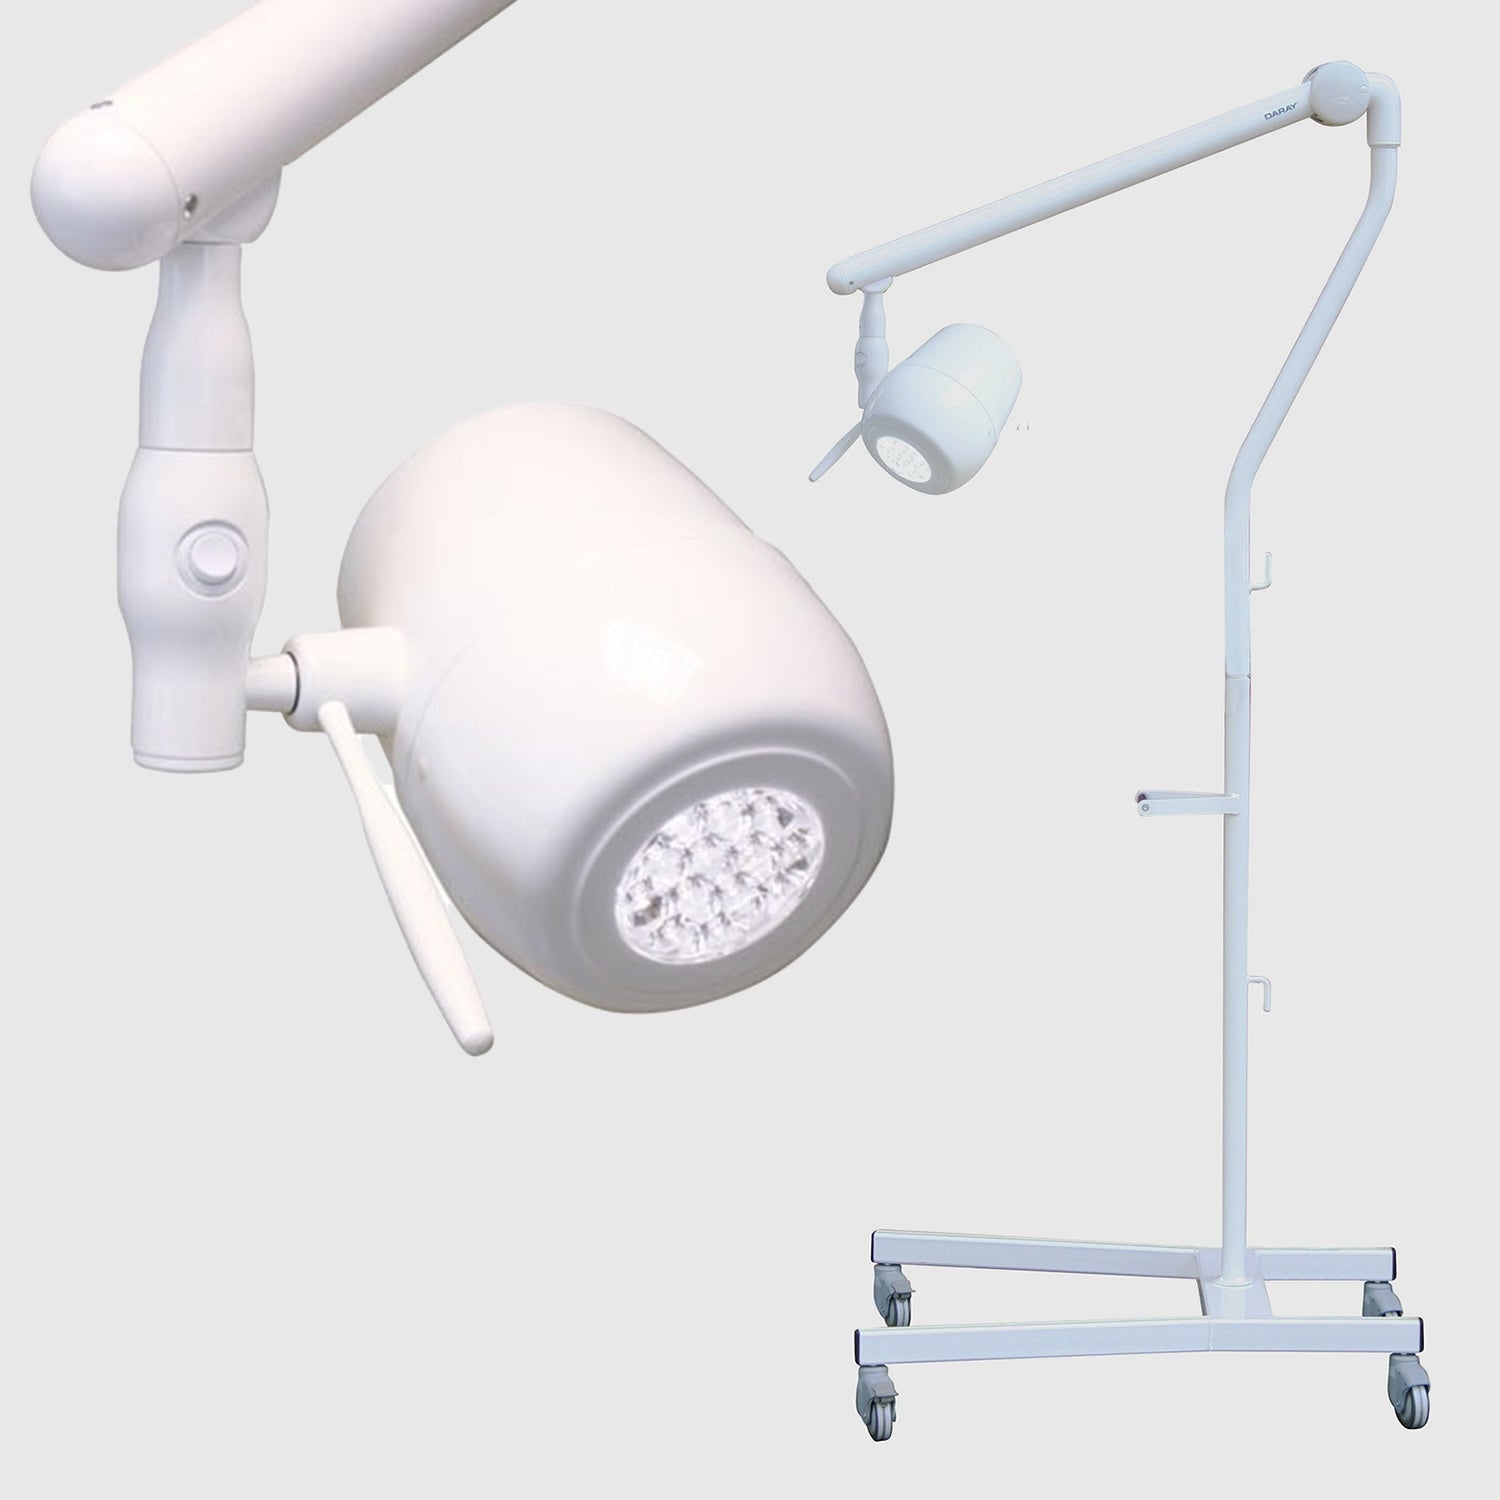 Daray S180 LED Minor Surgical Light (1)